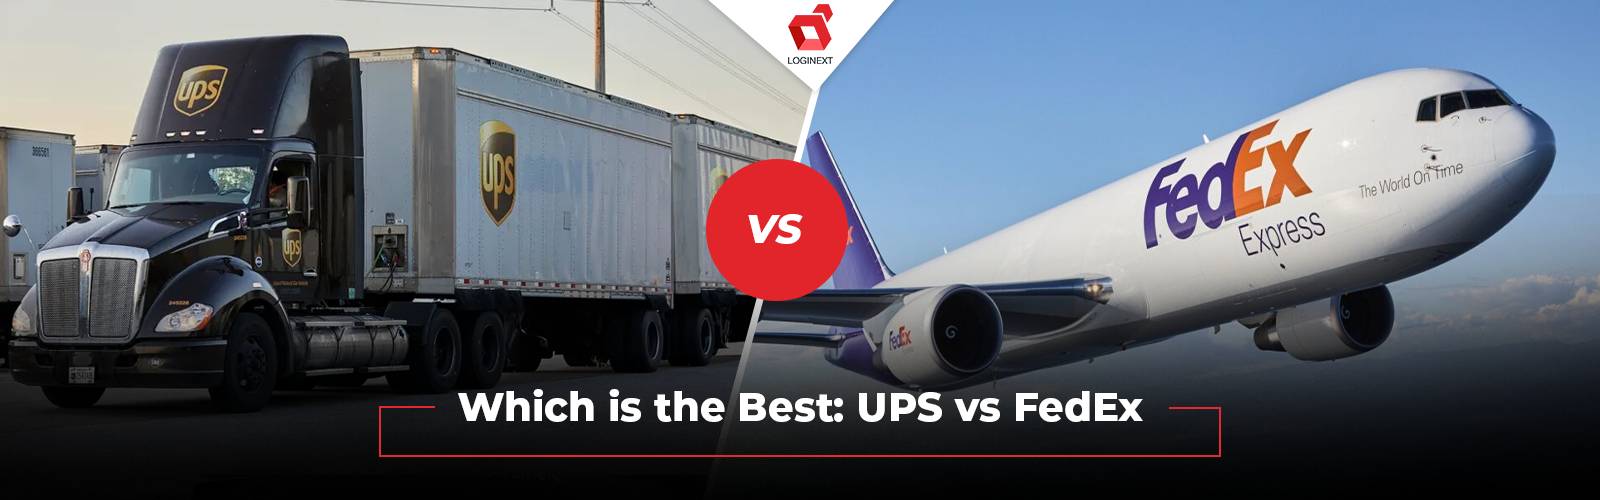 UPS vs FedEx: Which is the best?